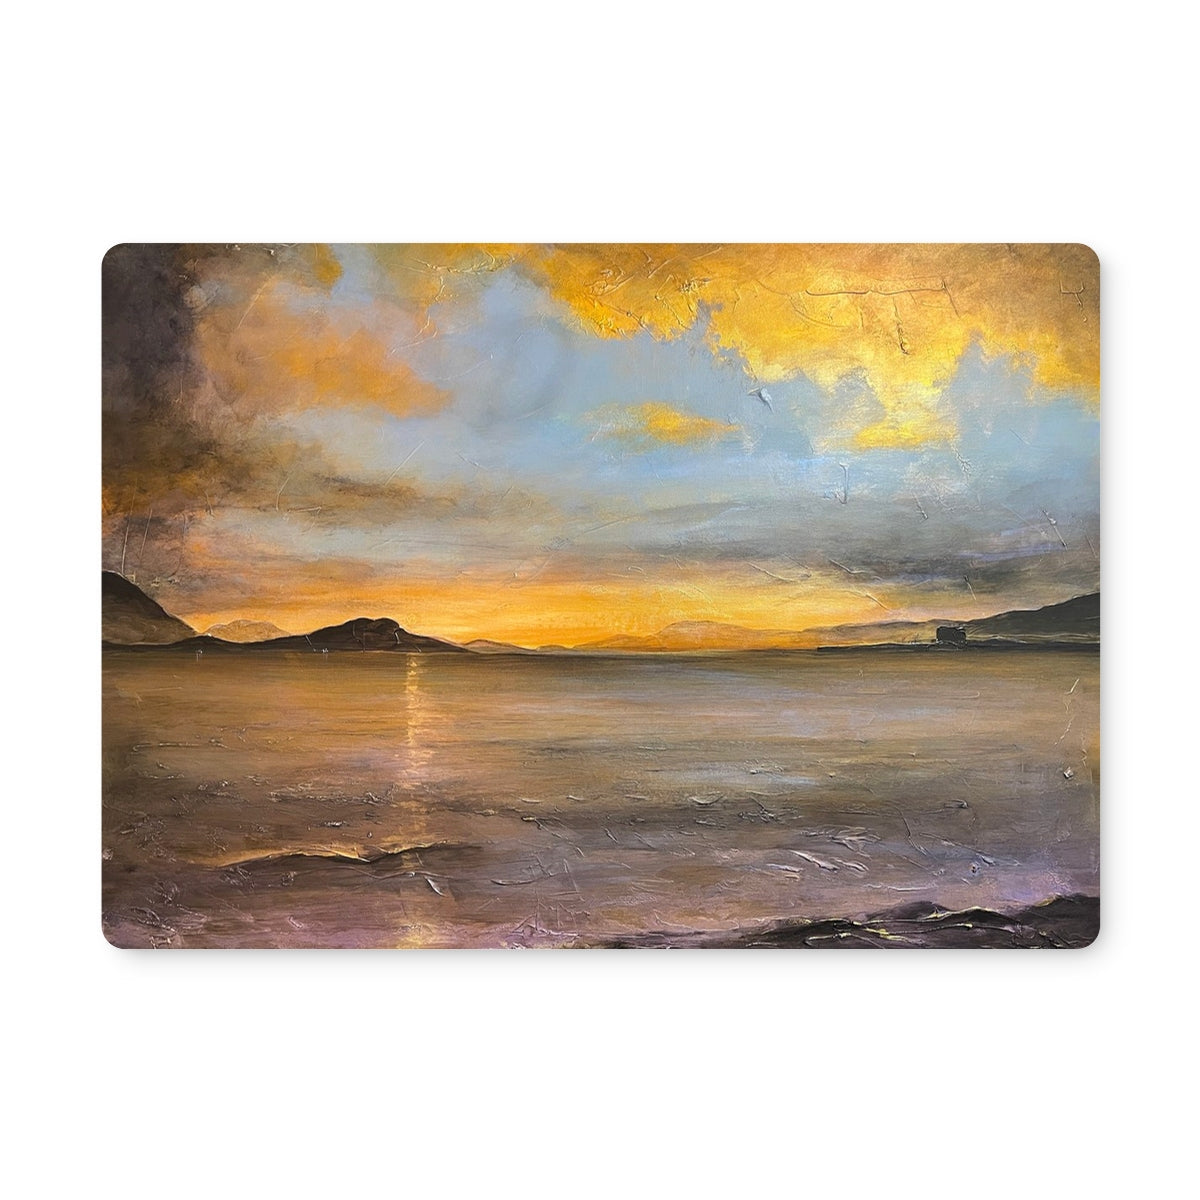 Loch Linnhe Sunset Art Gifts Placemat-Placemats-Scottish Lochs & Mountains Art Gallery-2 Placemats-Paintings, Prints, Homeware, Art Gifts From Scotland By Scottish Artist Kevin Hunter